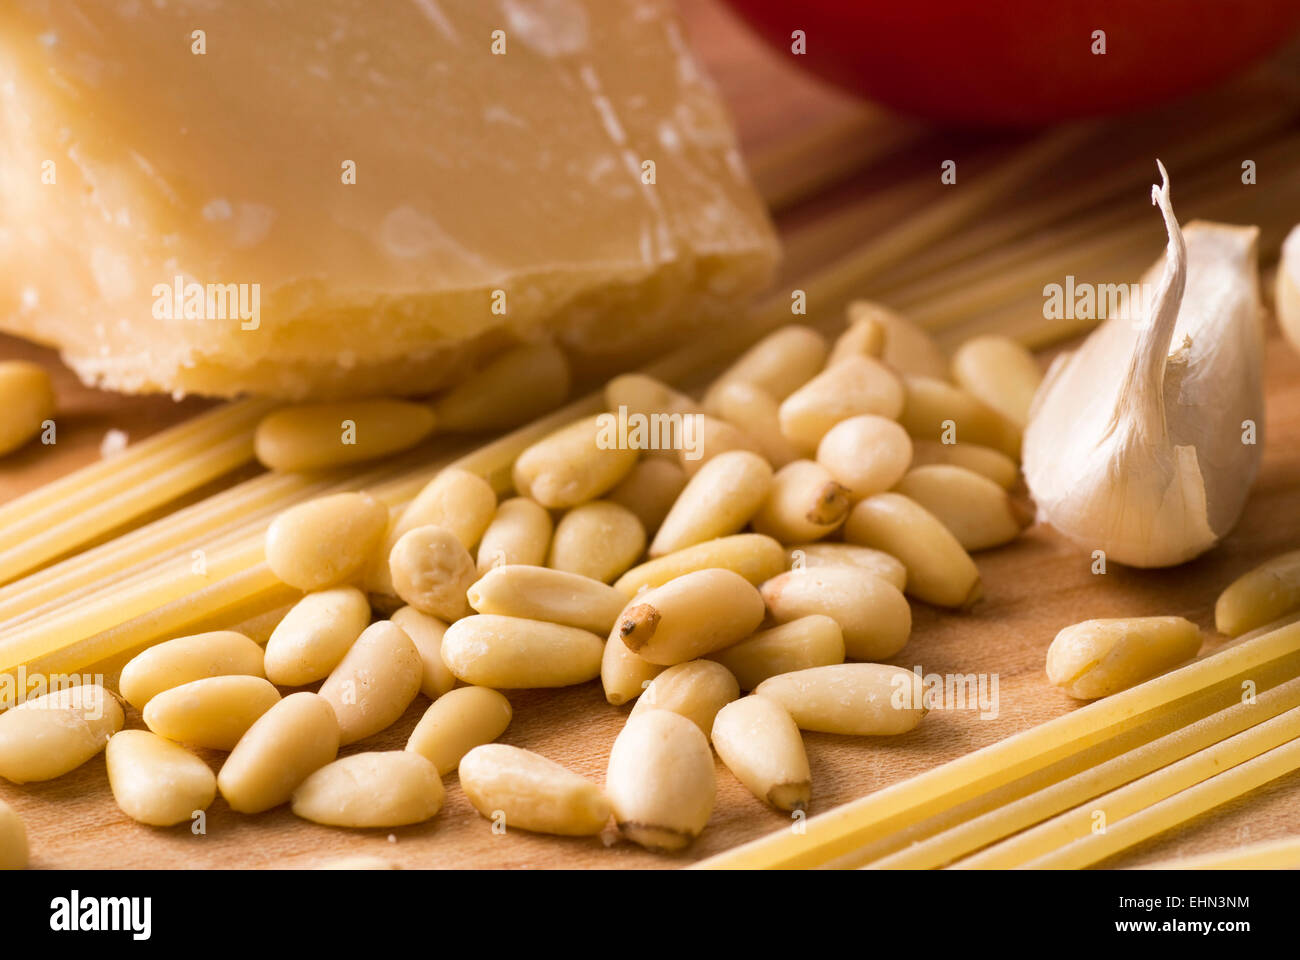 Pine nuts with spaghetti, garlic and parmesan. Stock Photo